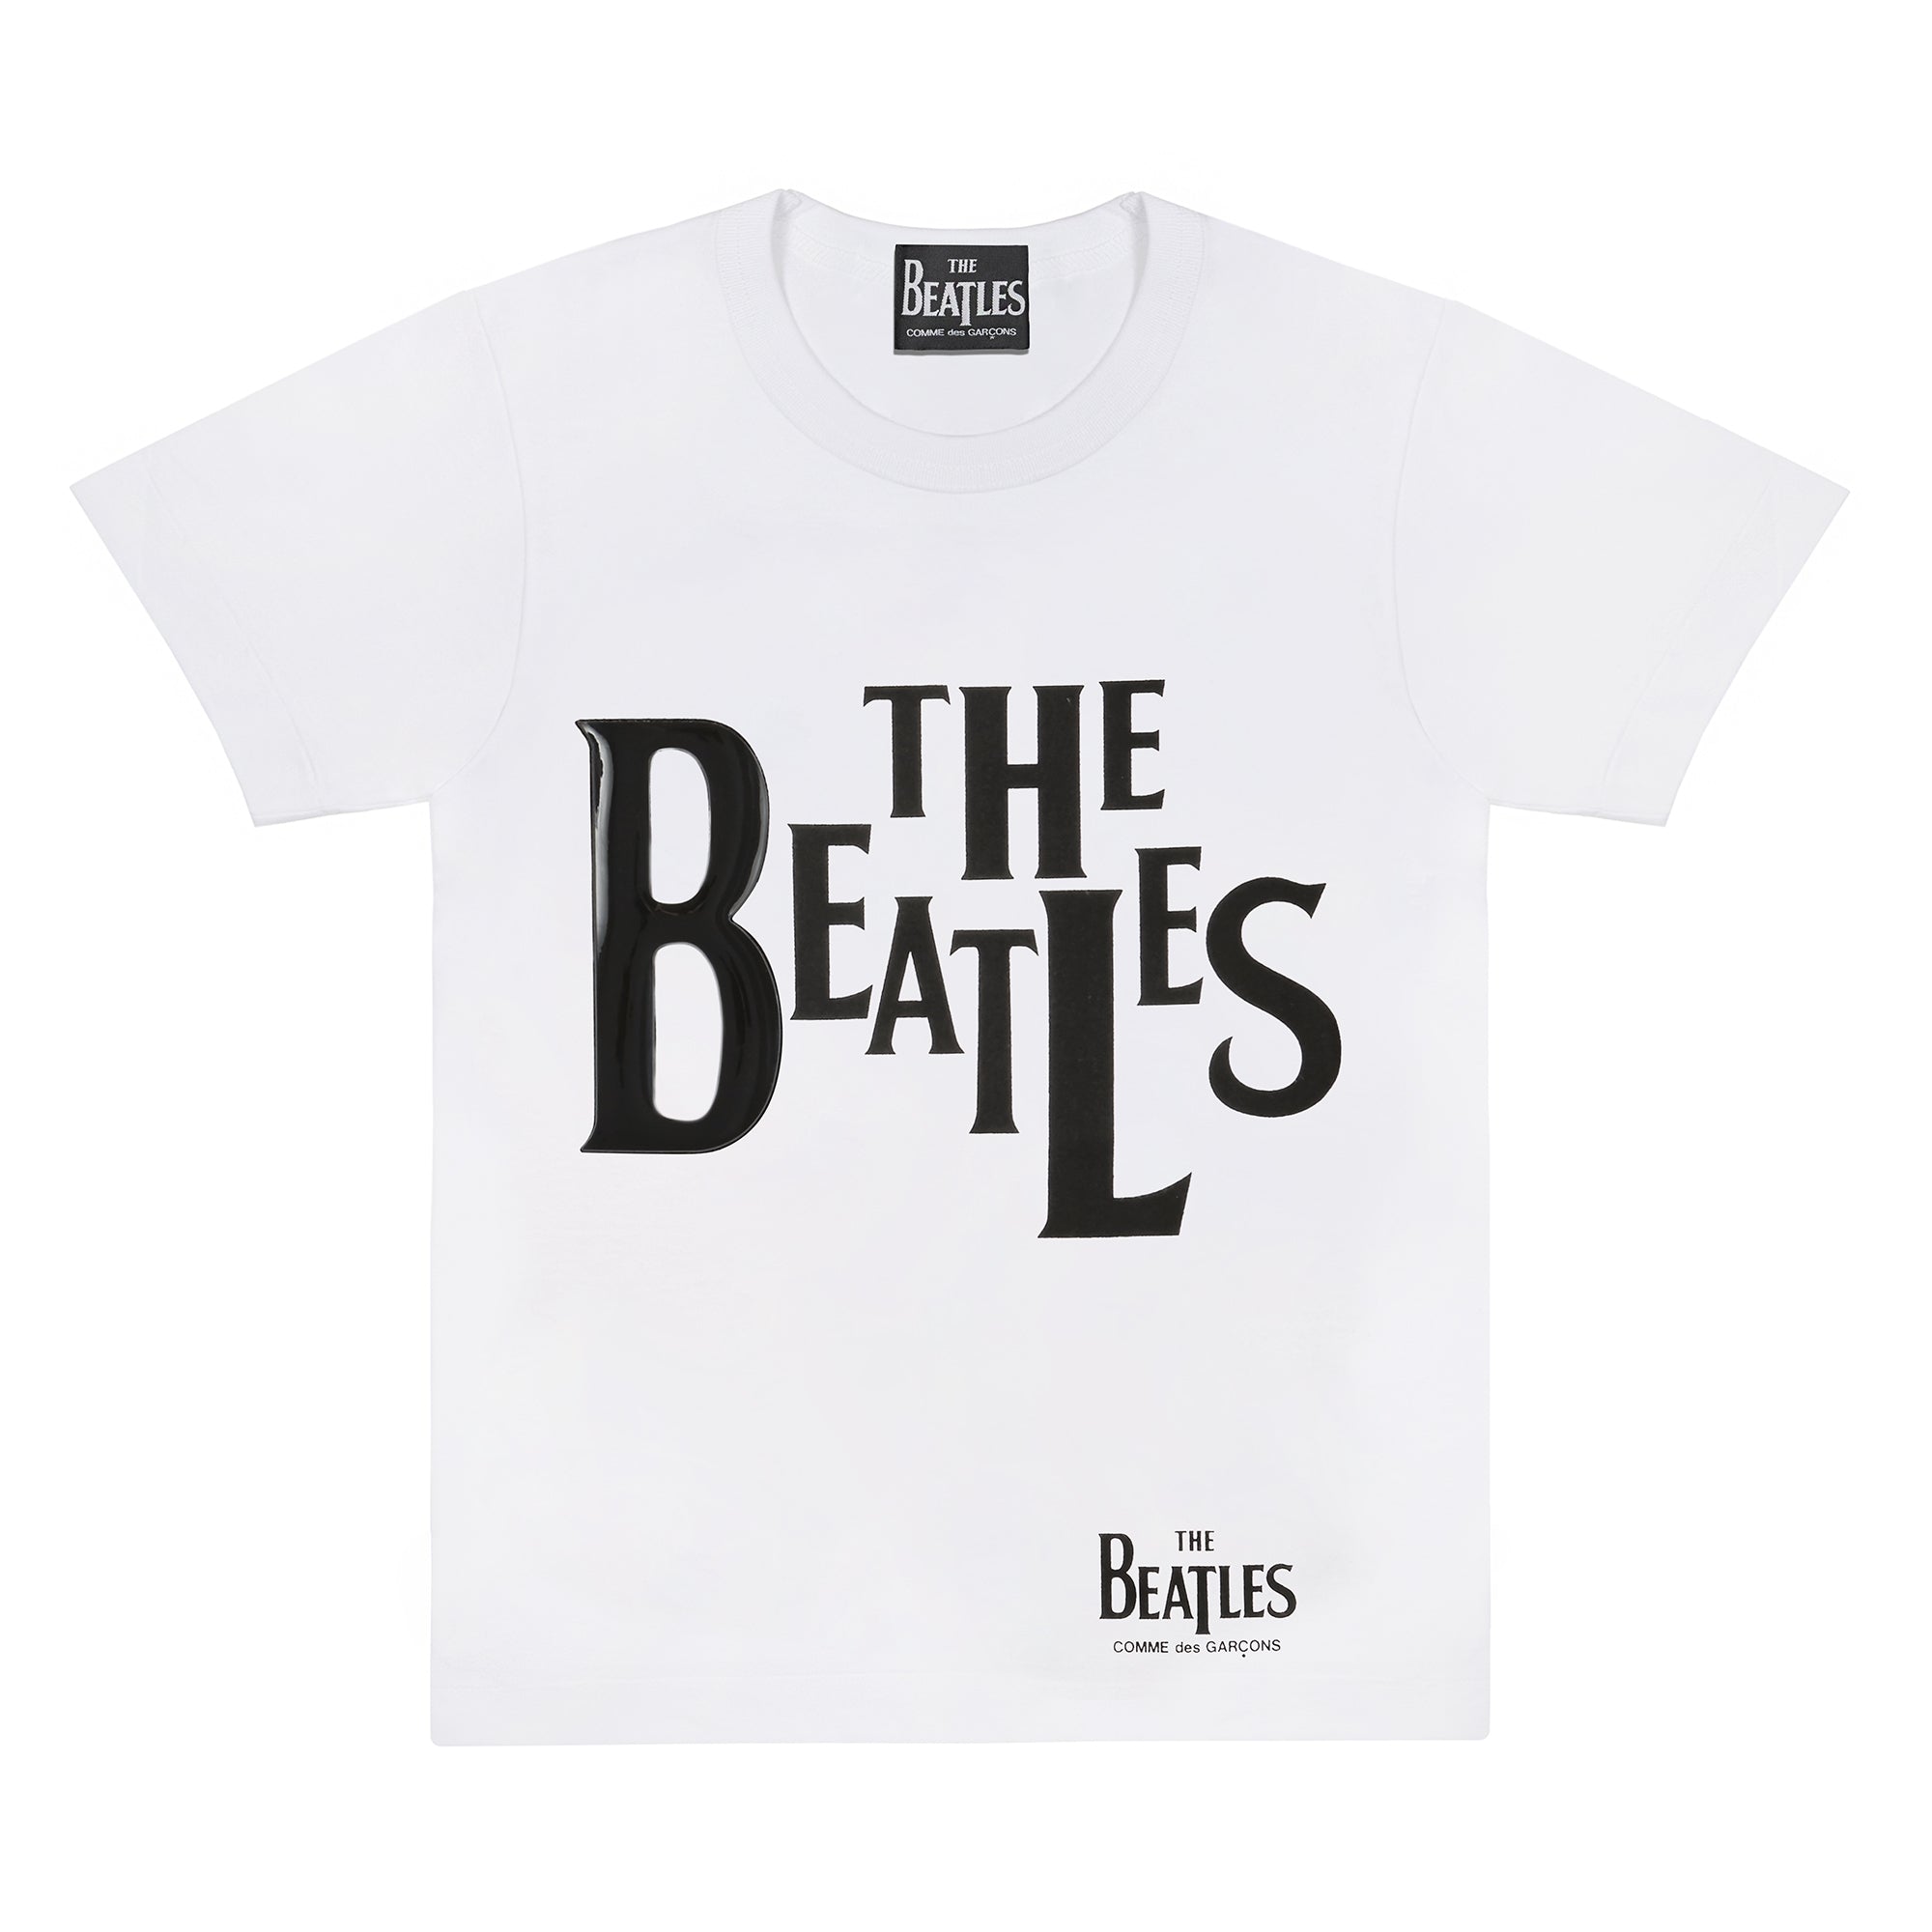 The Beatles CDG - Rubber Printed T-Shirt White - (VT-T002-051